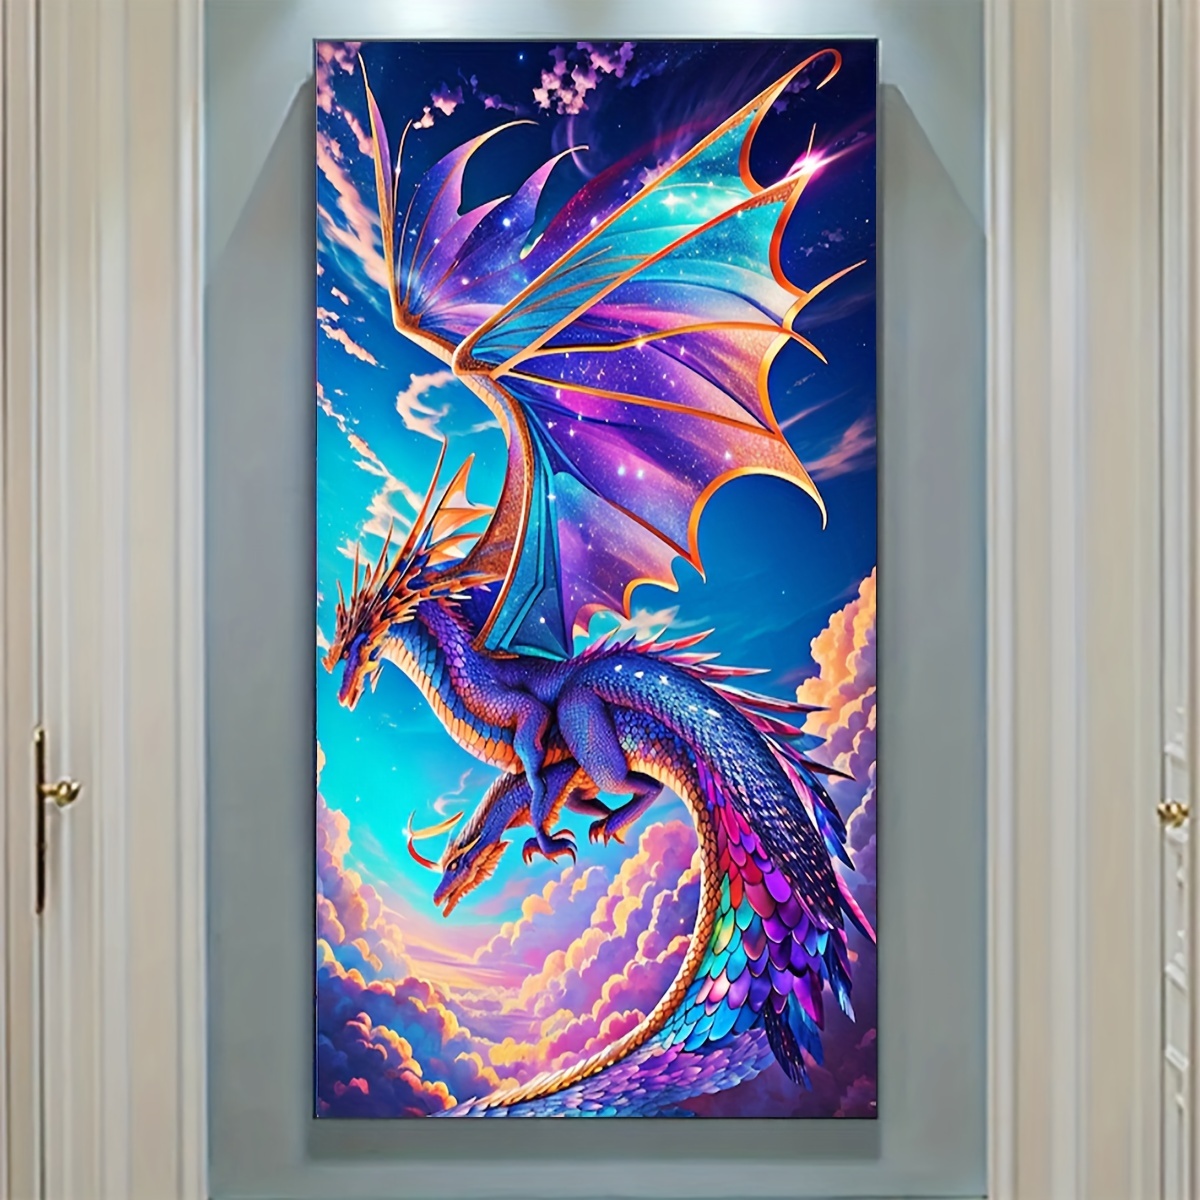 Snuqevc Colorful Dragon Diamond Painting Kits, 5D Diamond Painting Digital  Oil Painting for Adult Beginners DIY Decompression Handmade, Ideal for Room